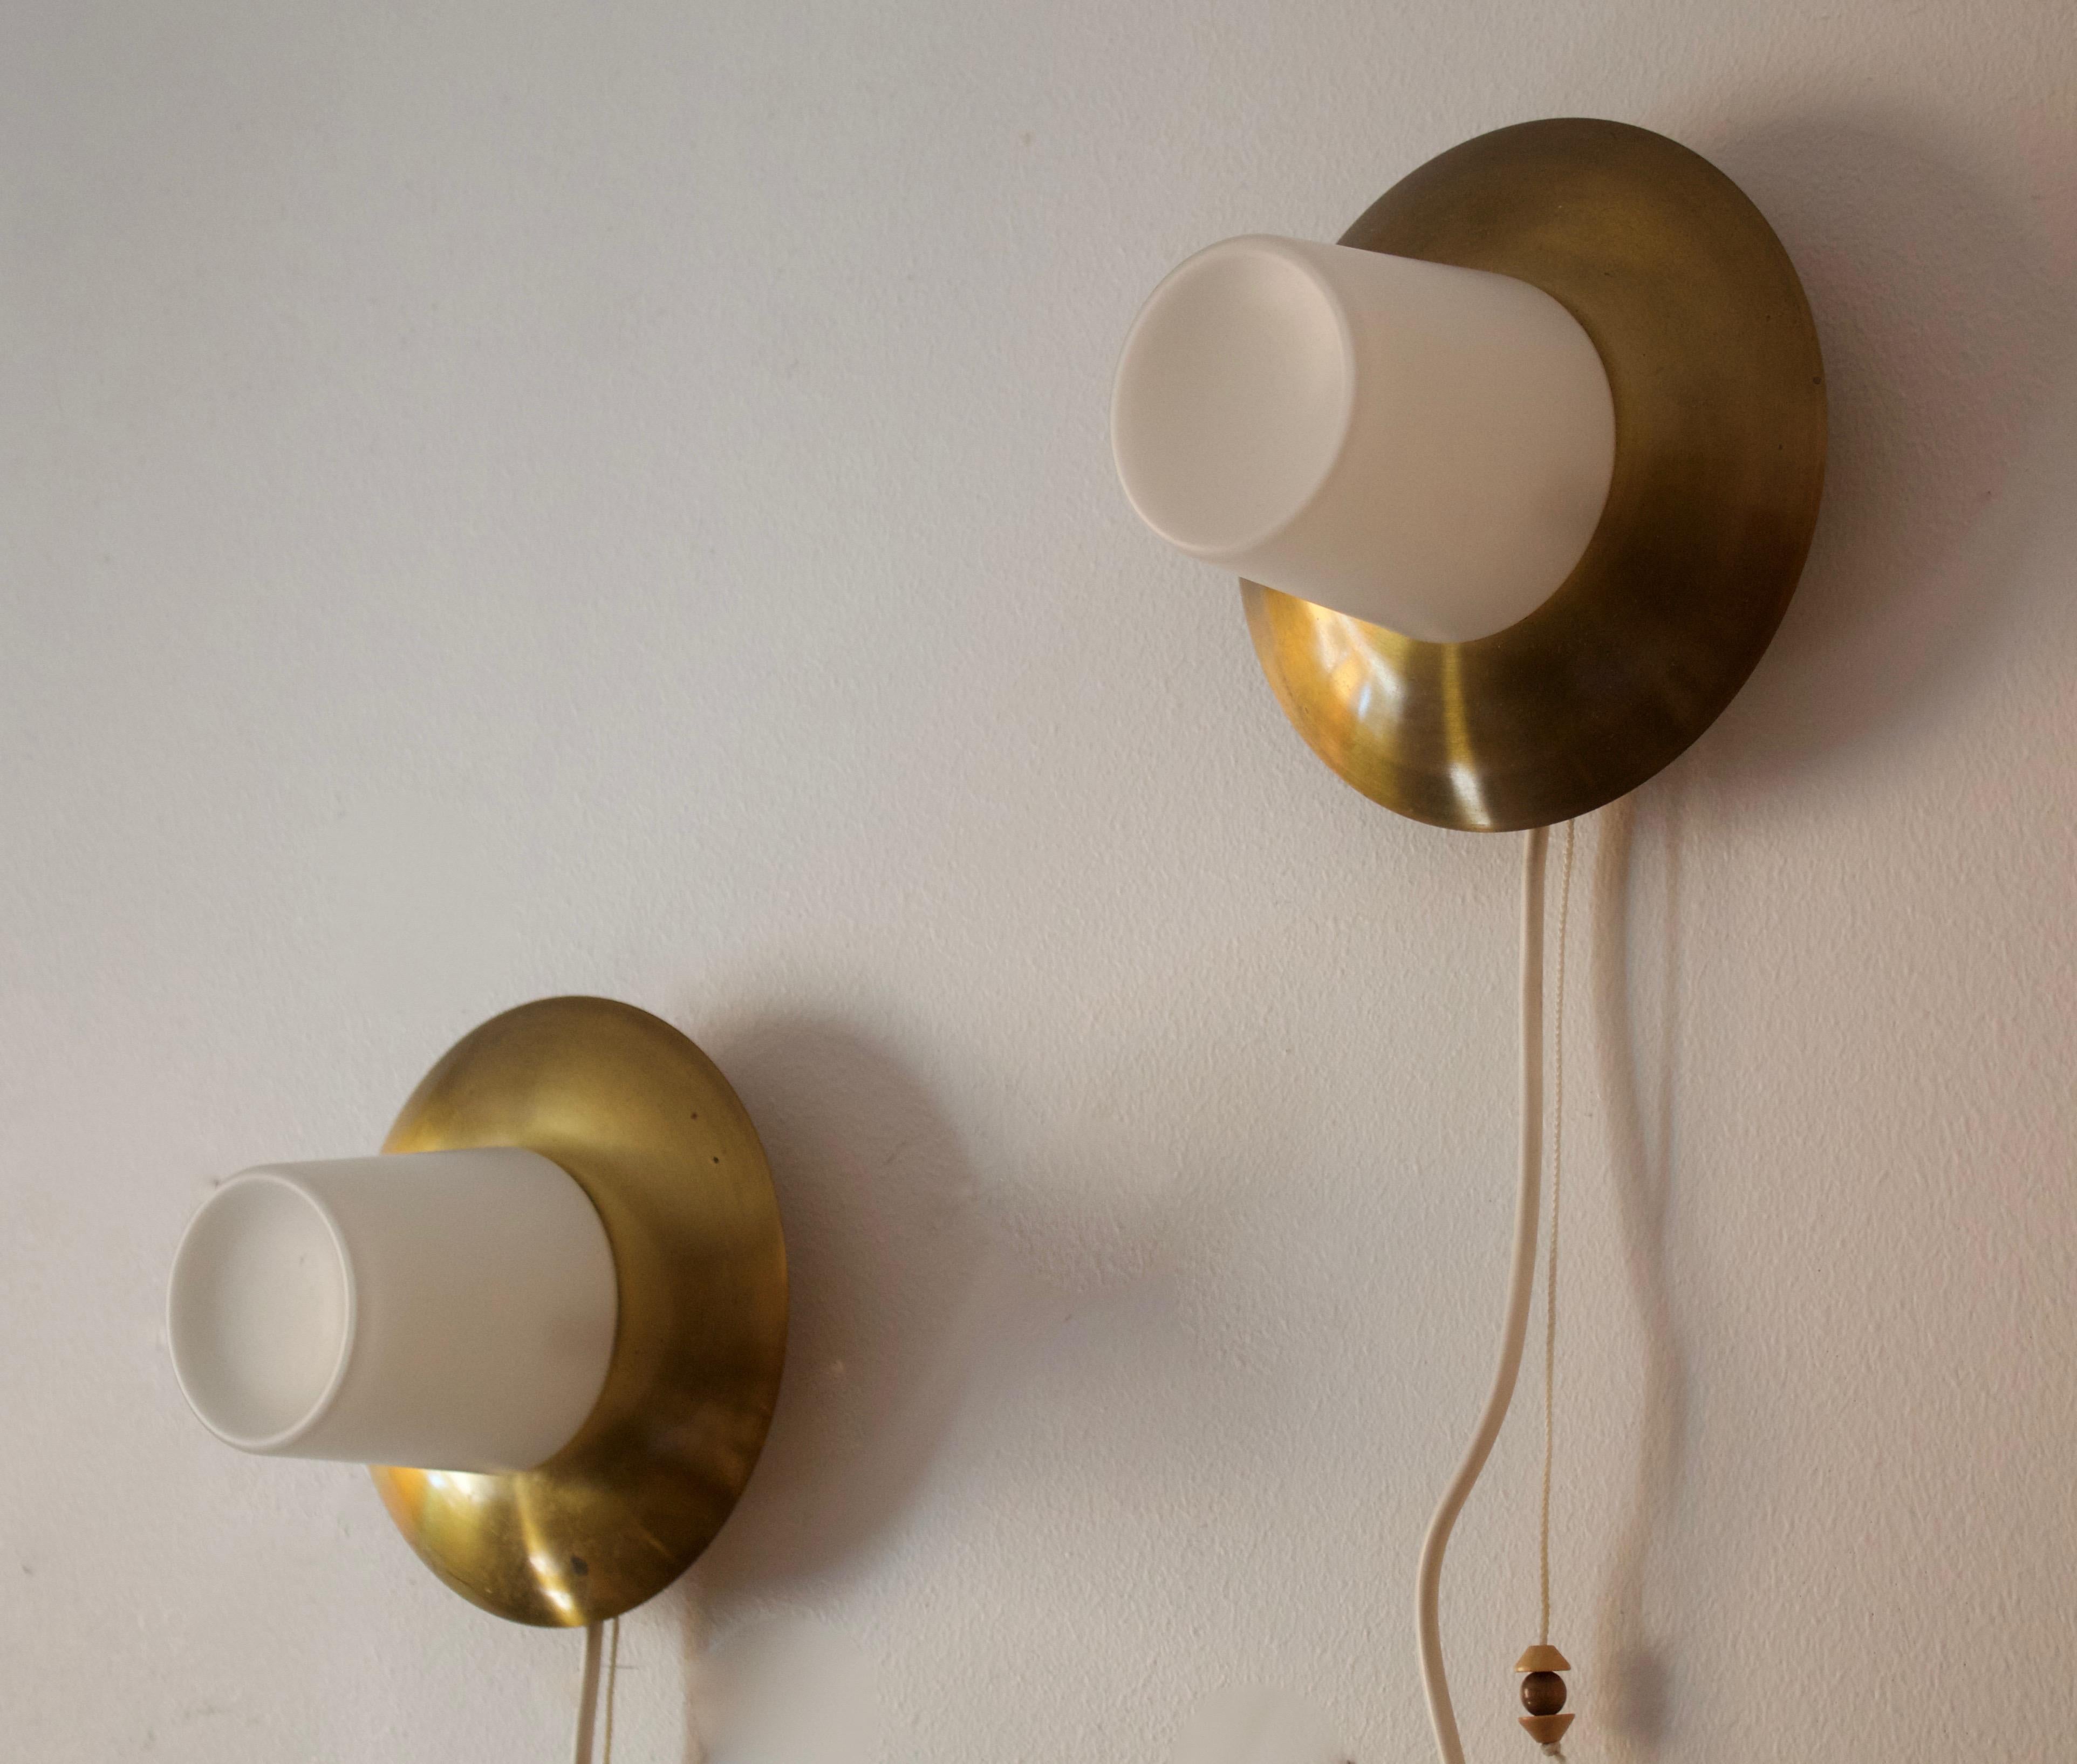 A pair of wall lights, designed and produced in Sweden, c. 1950s-1960s.